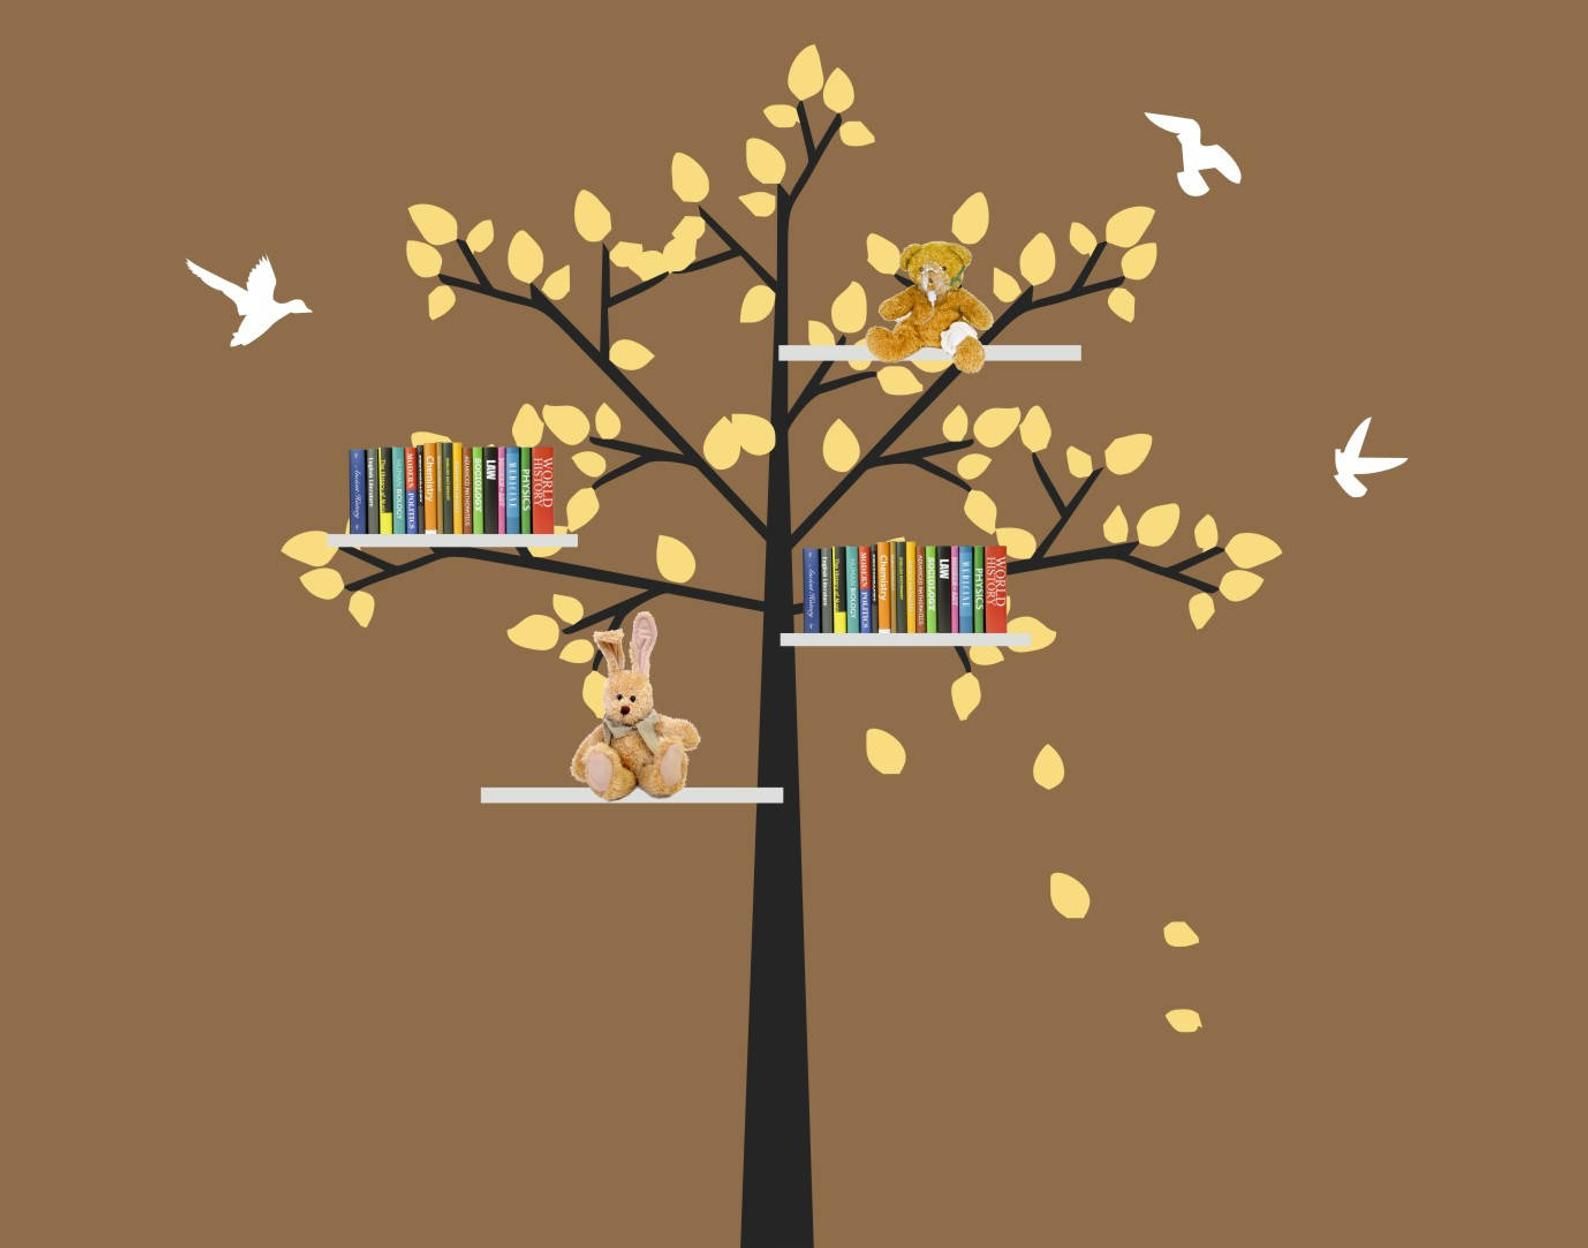 Image of bookshelves in a tree used for a wall decal. 